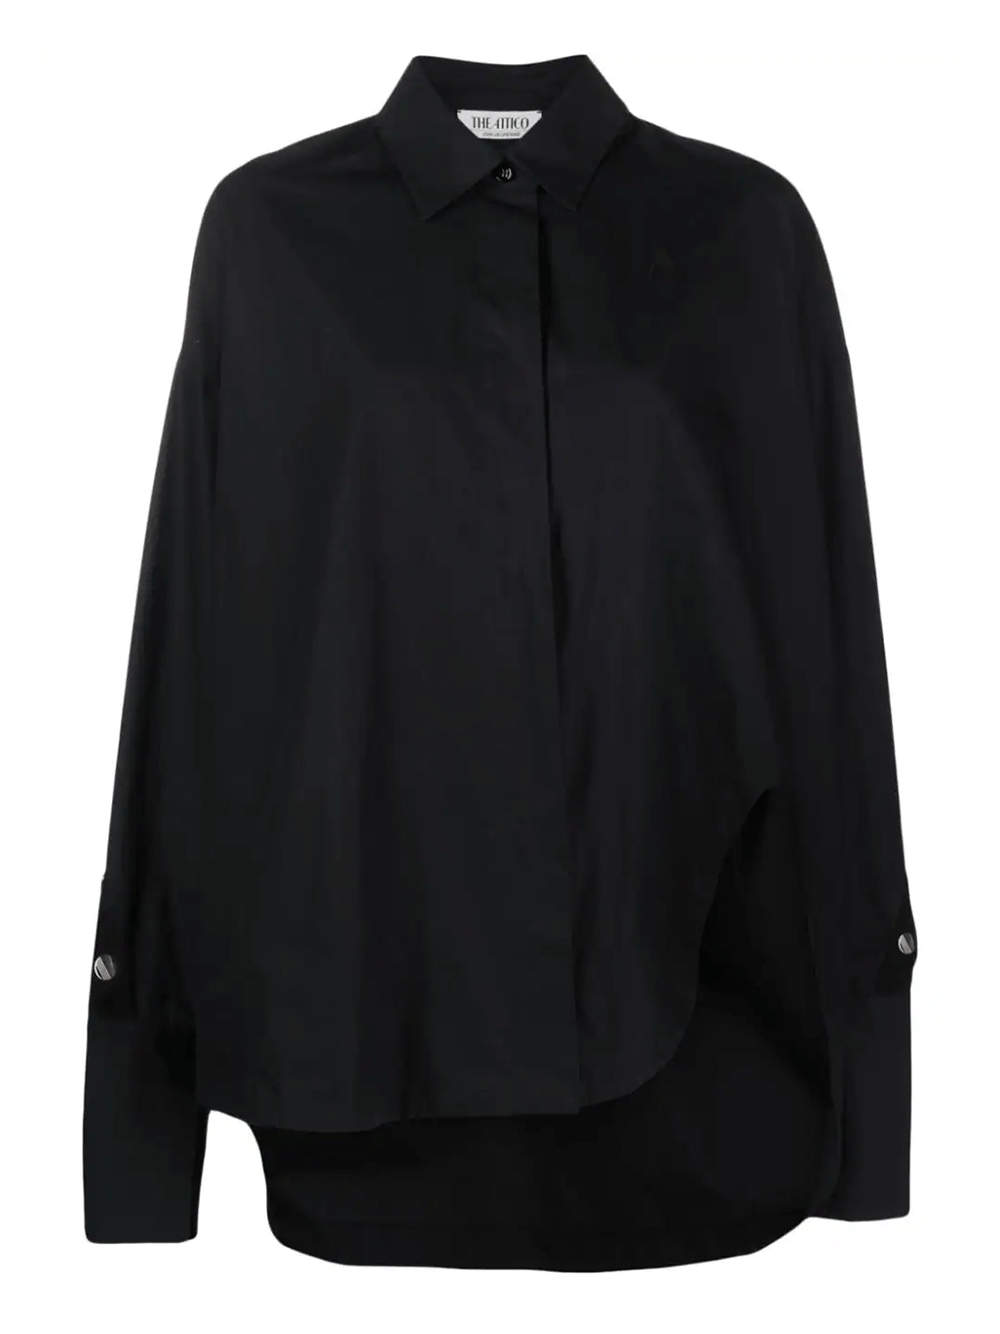 The-Attico-Shirt-With-Back-Snap-Details-Black-1